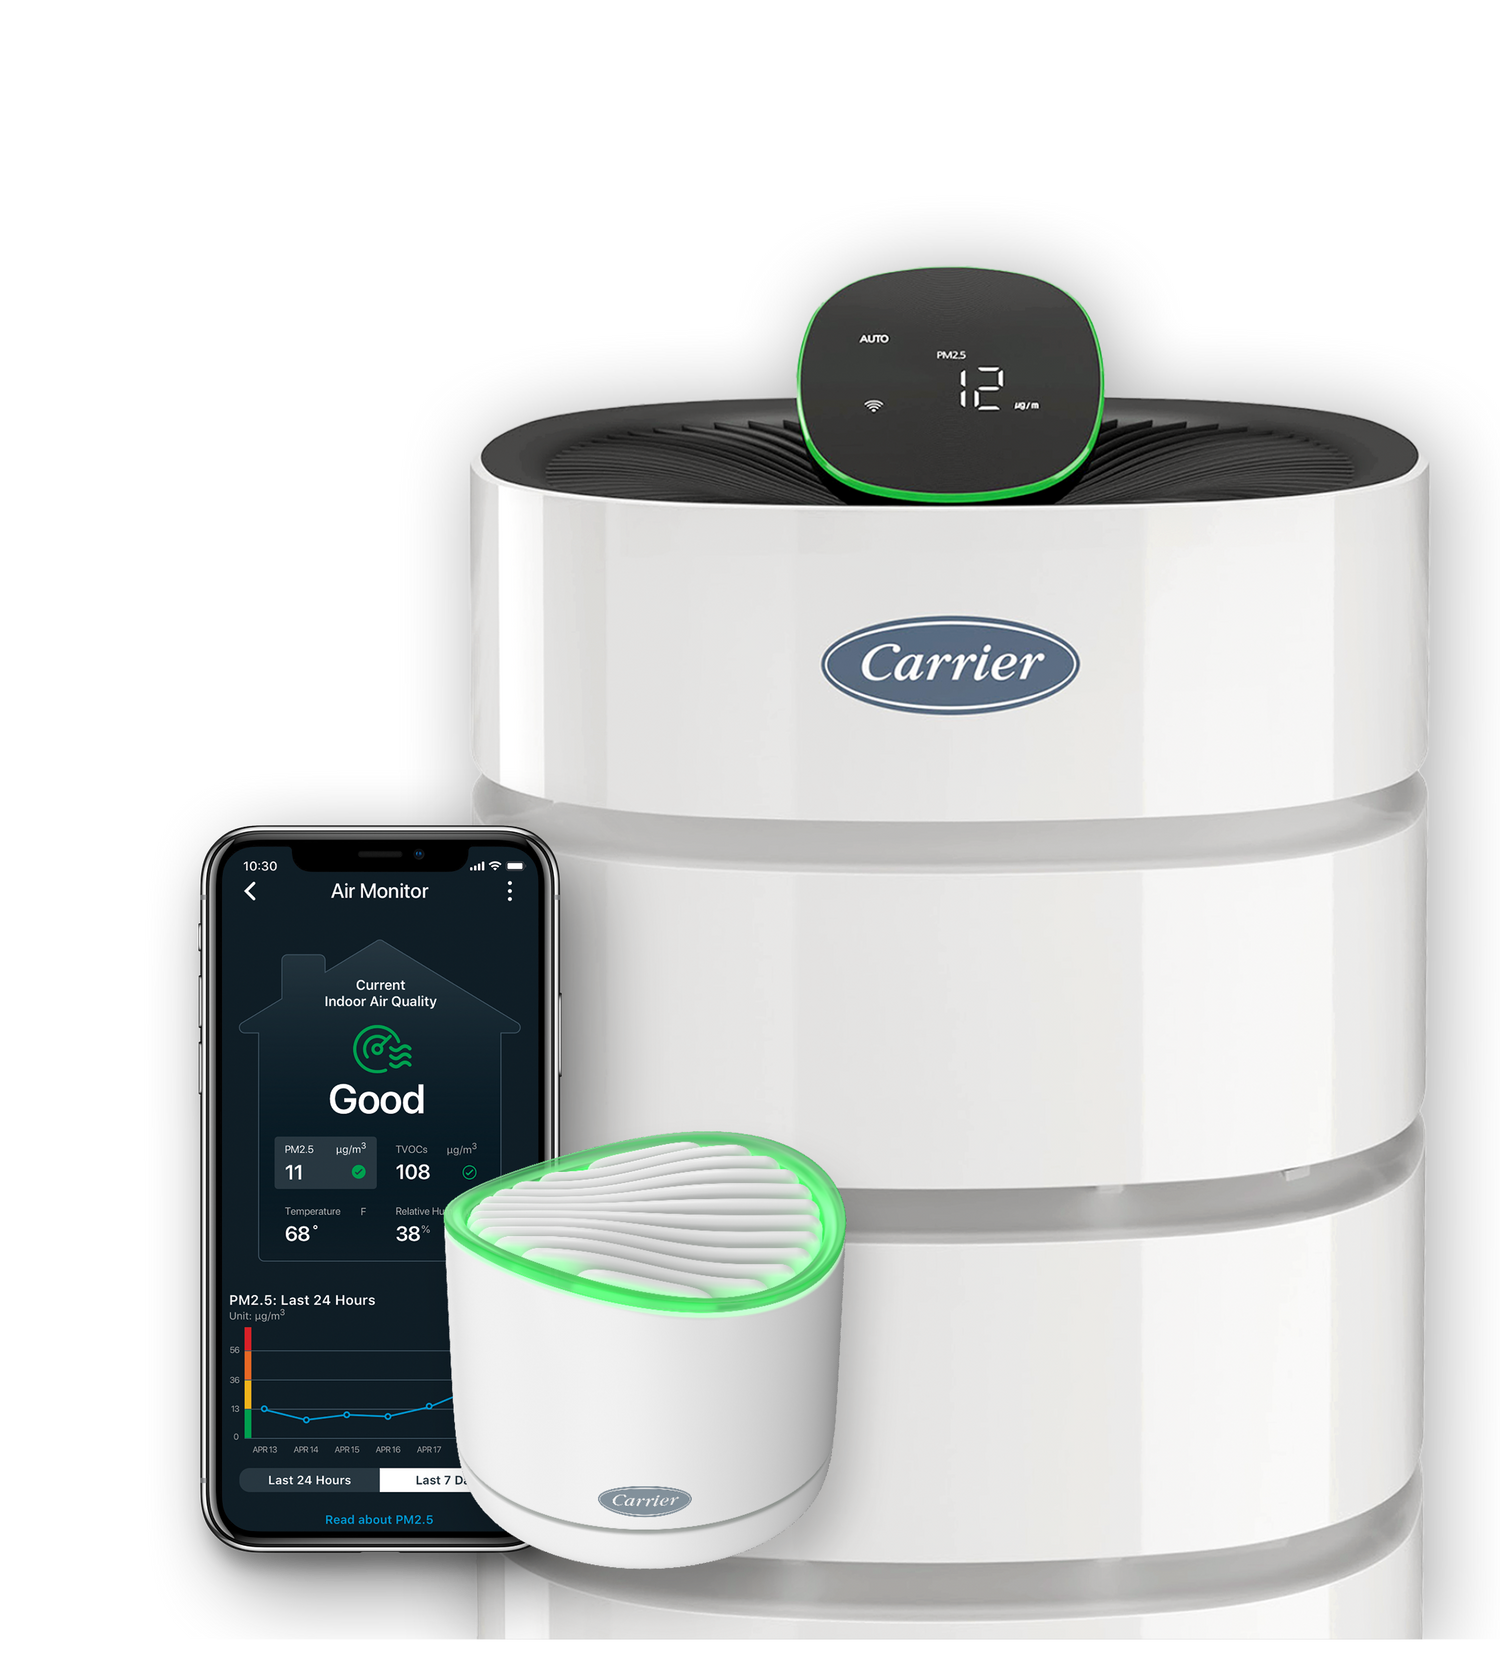 Carrier Smart Air Purifier displayed alongside Carrier Air Monitor and the home smartphone app